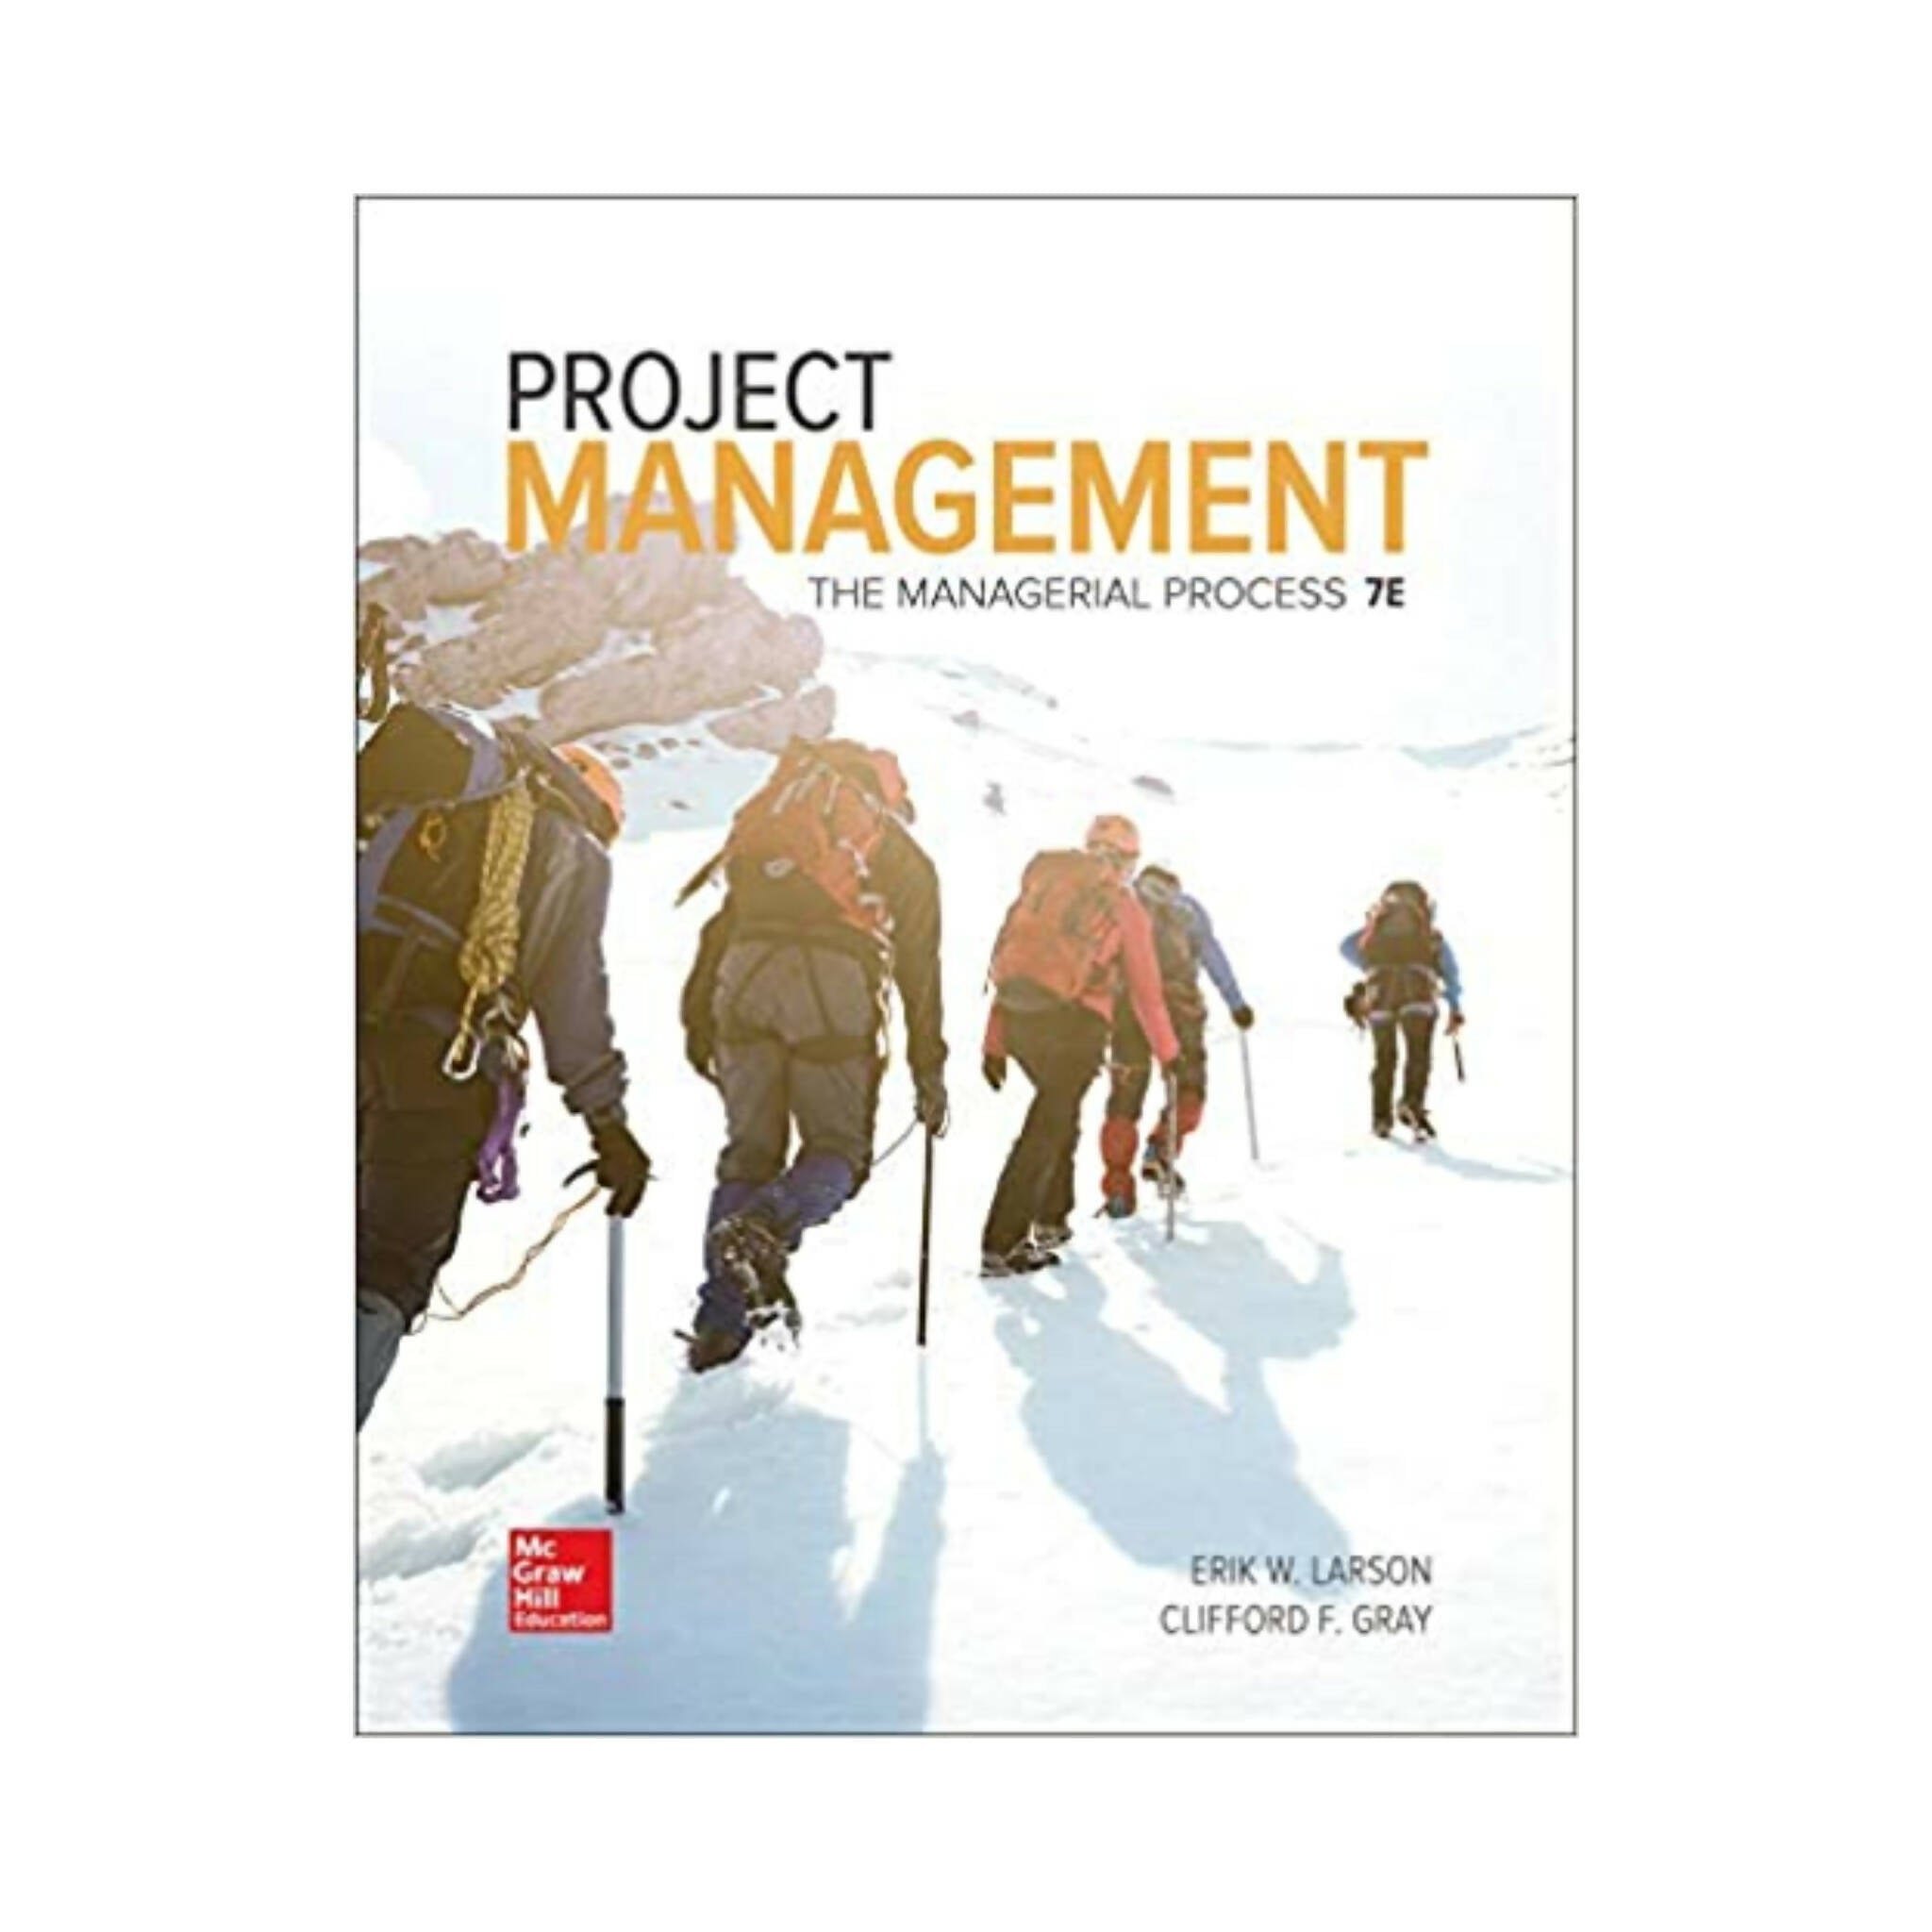 Book, Project Management, The Managerial Process (Mcgraw-hill Series Operations and Decision Sciences)